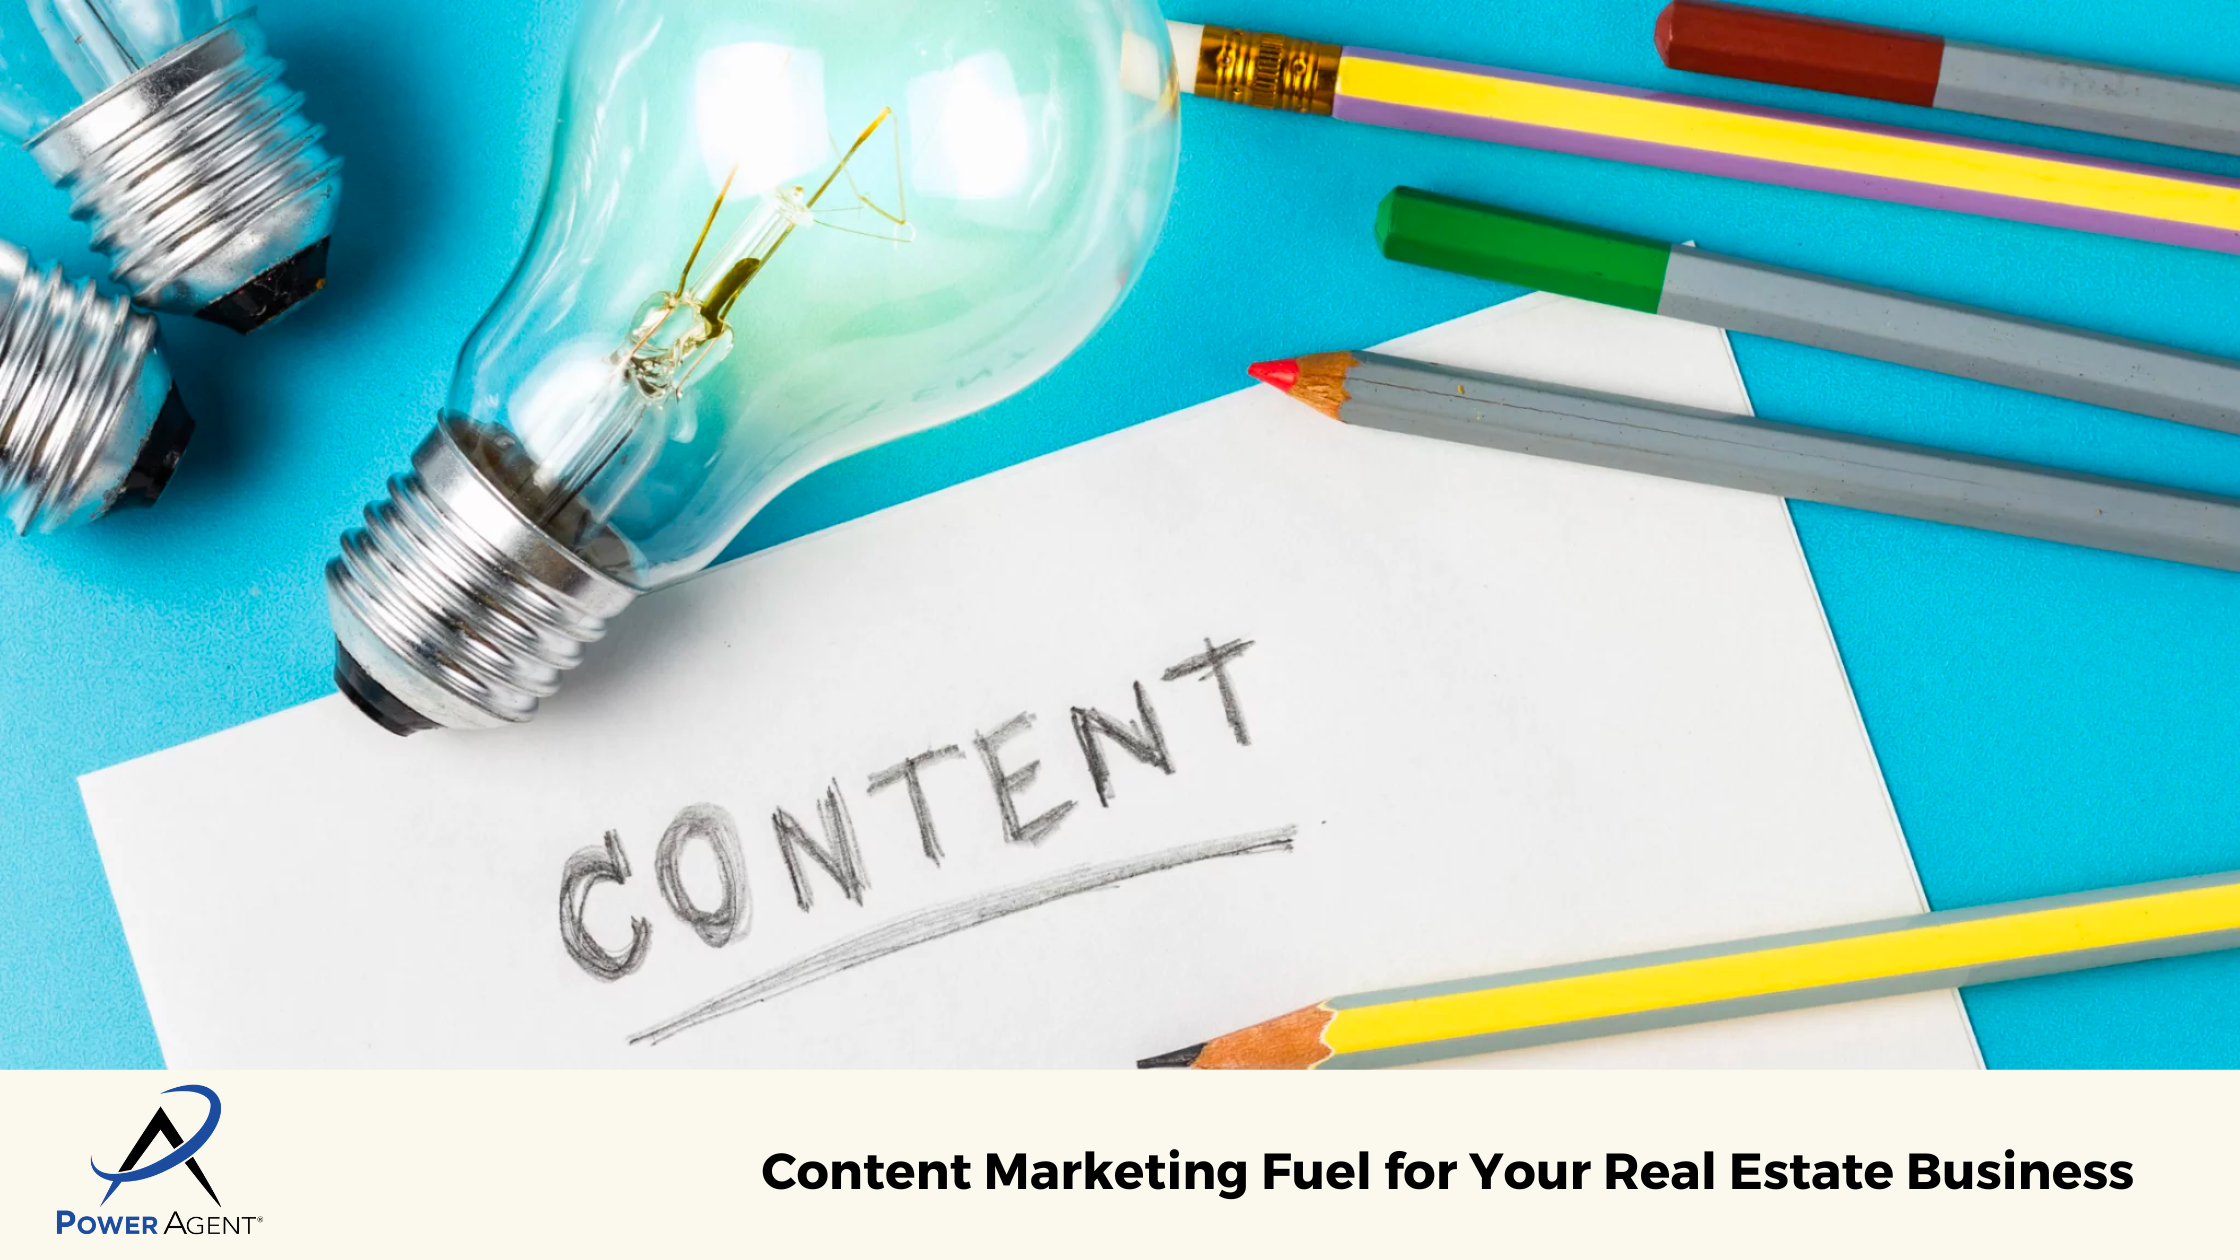 Content Marketing Fuel for Your Real Estate Business